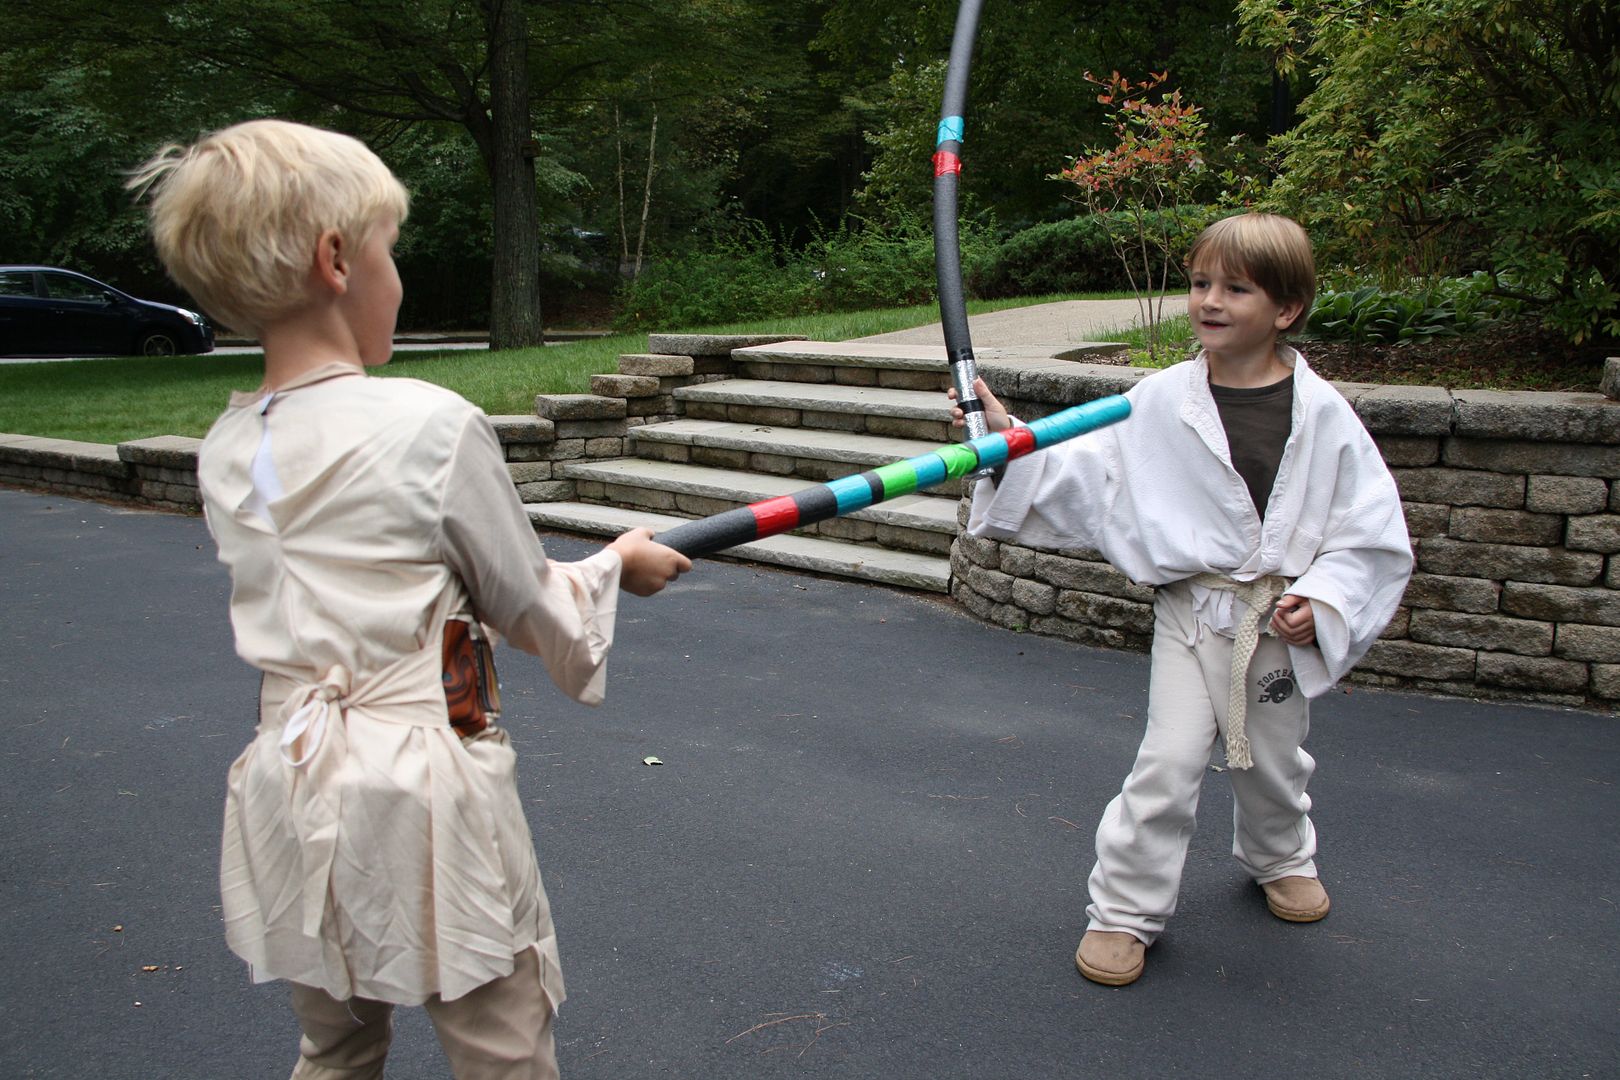 DIY Star Wars lightsabers for kids double as craft project, party activity, and goody bag take-home gift! | CoolMomPicks.com